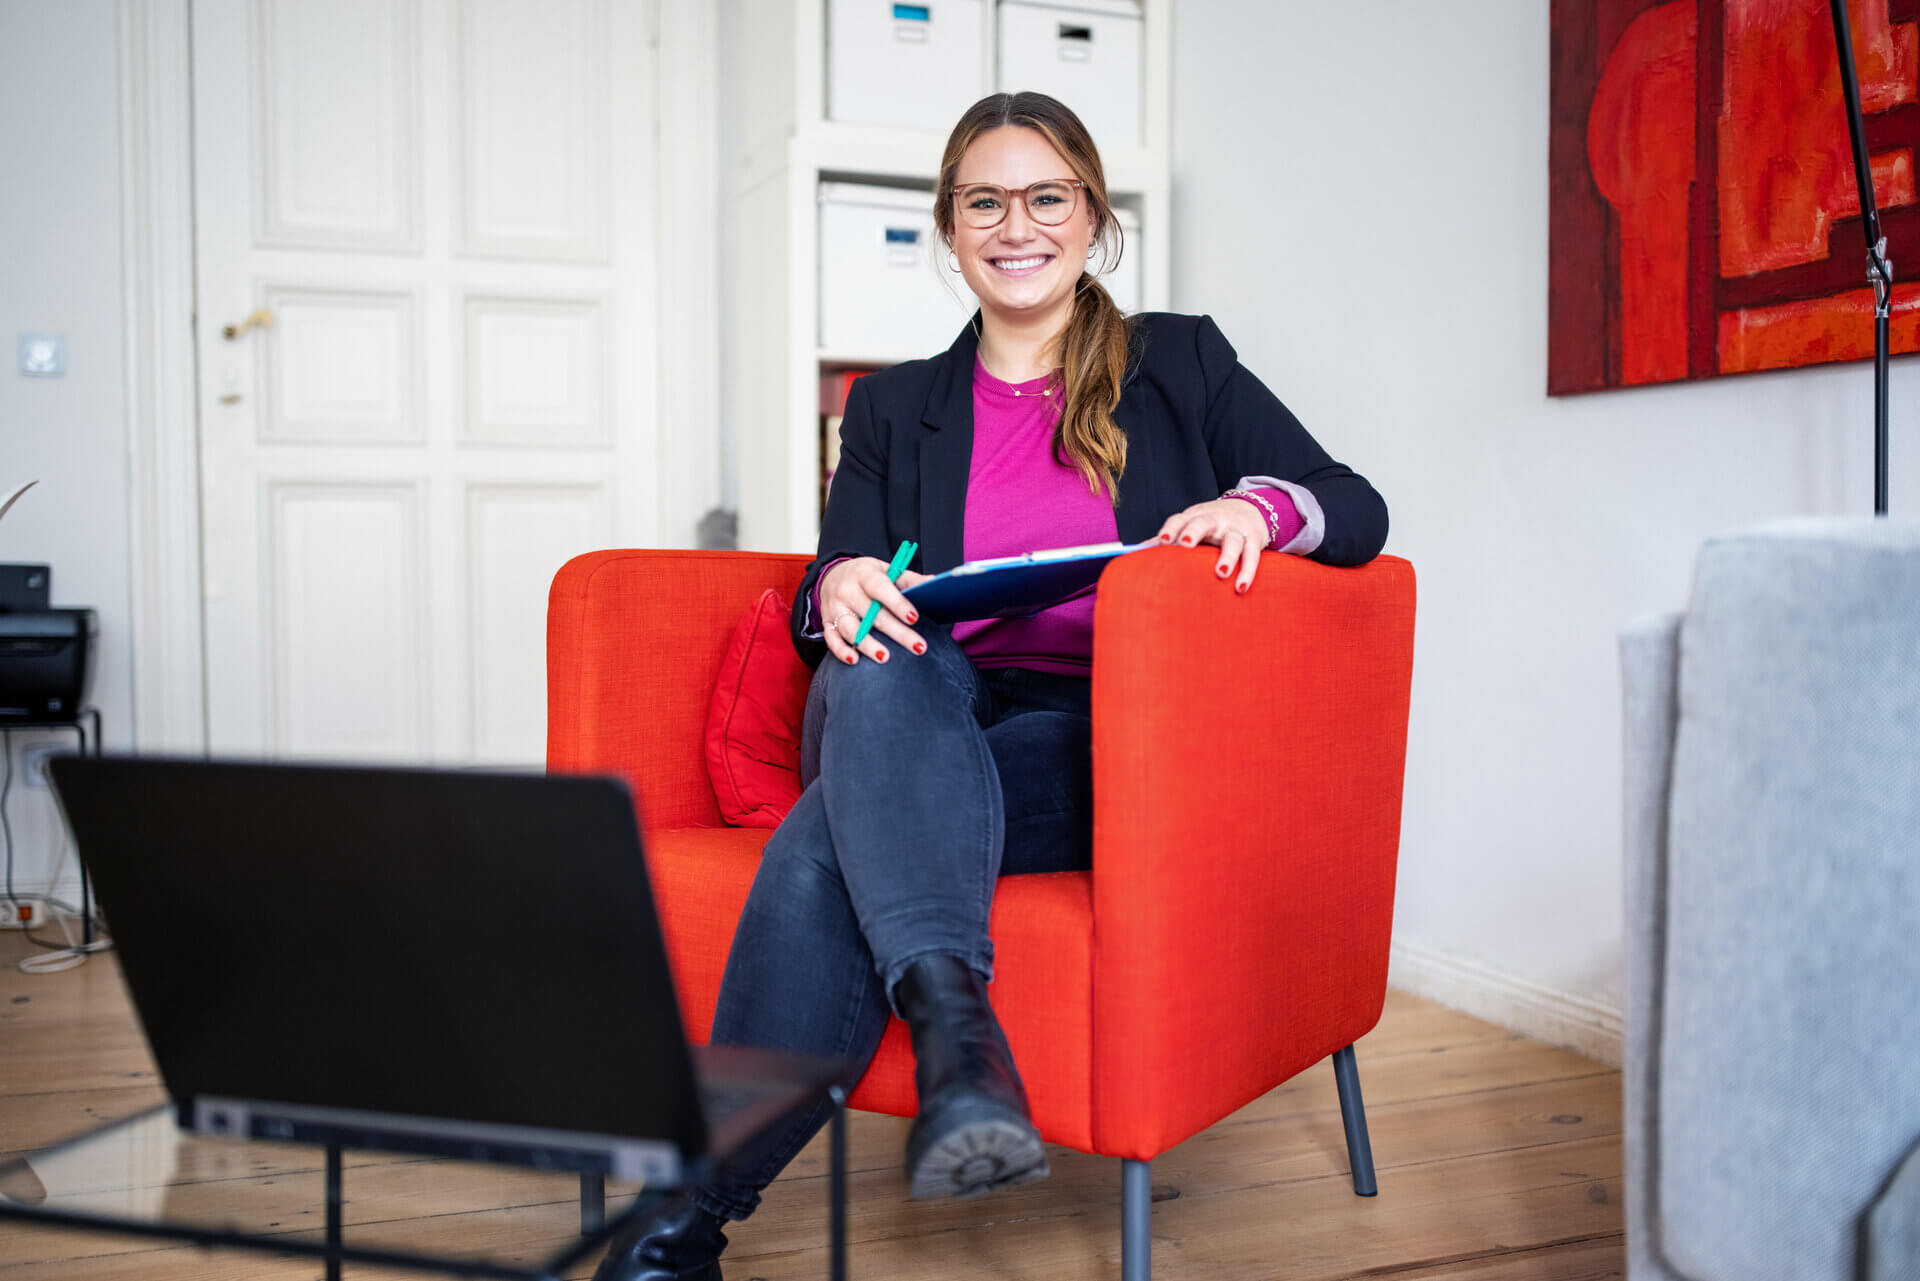 Psychologist sitting in a red chair smiling